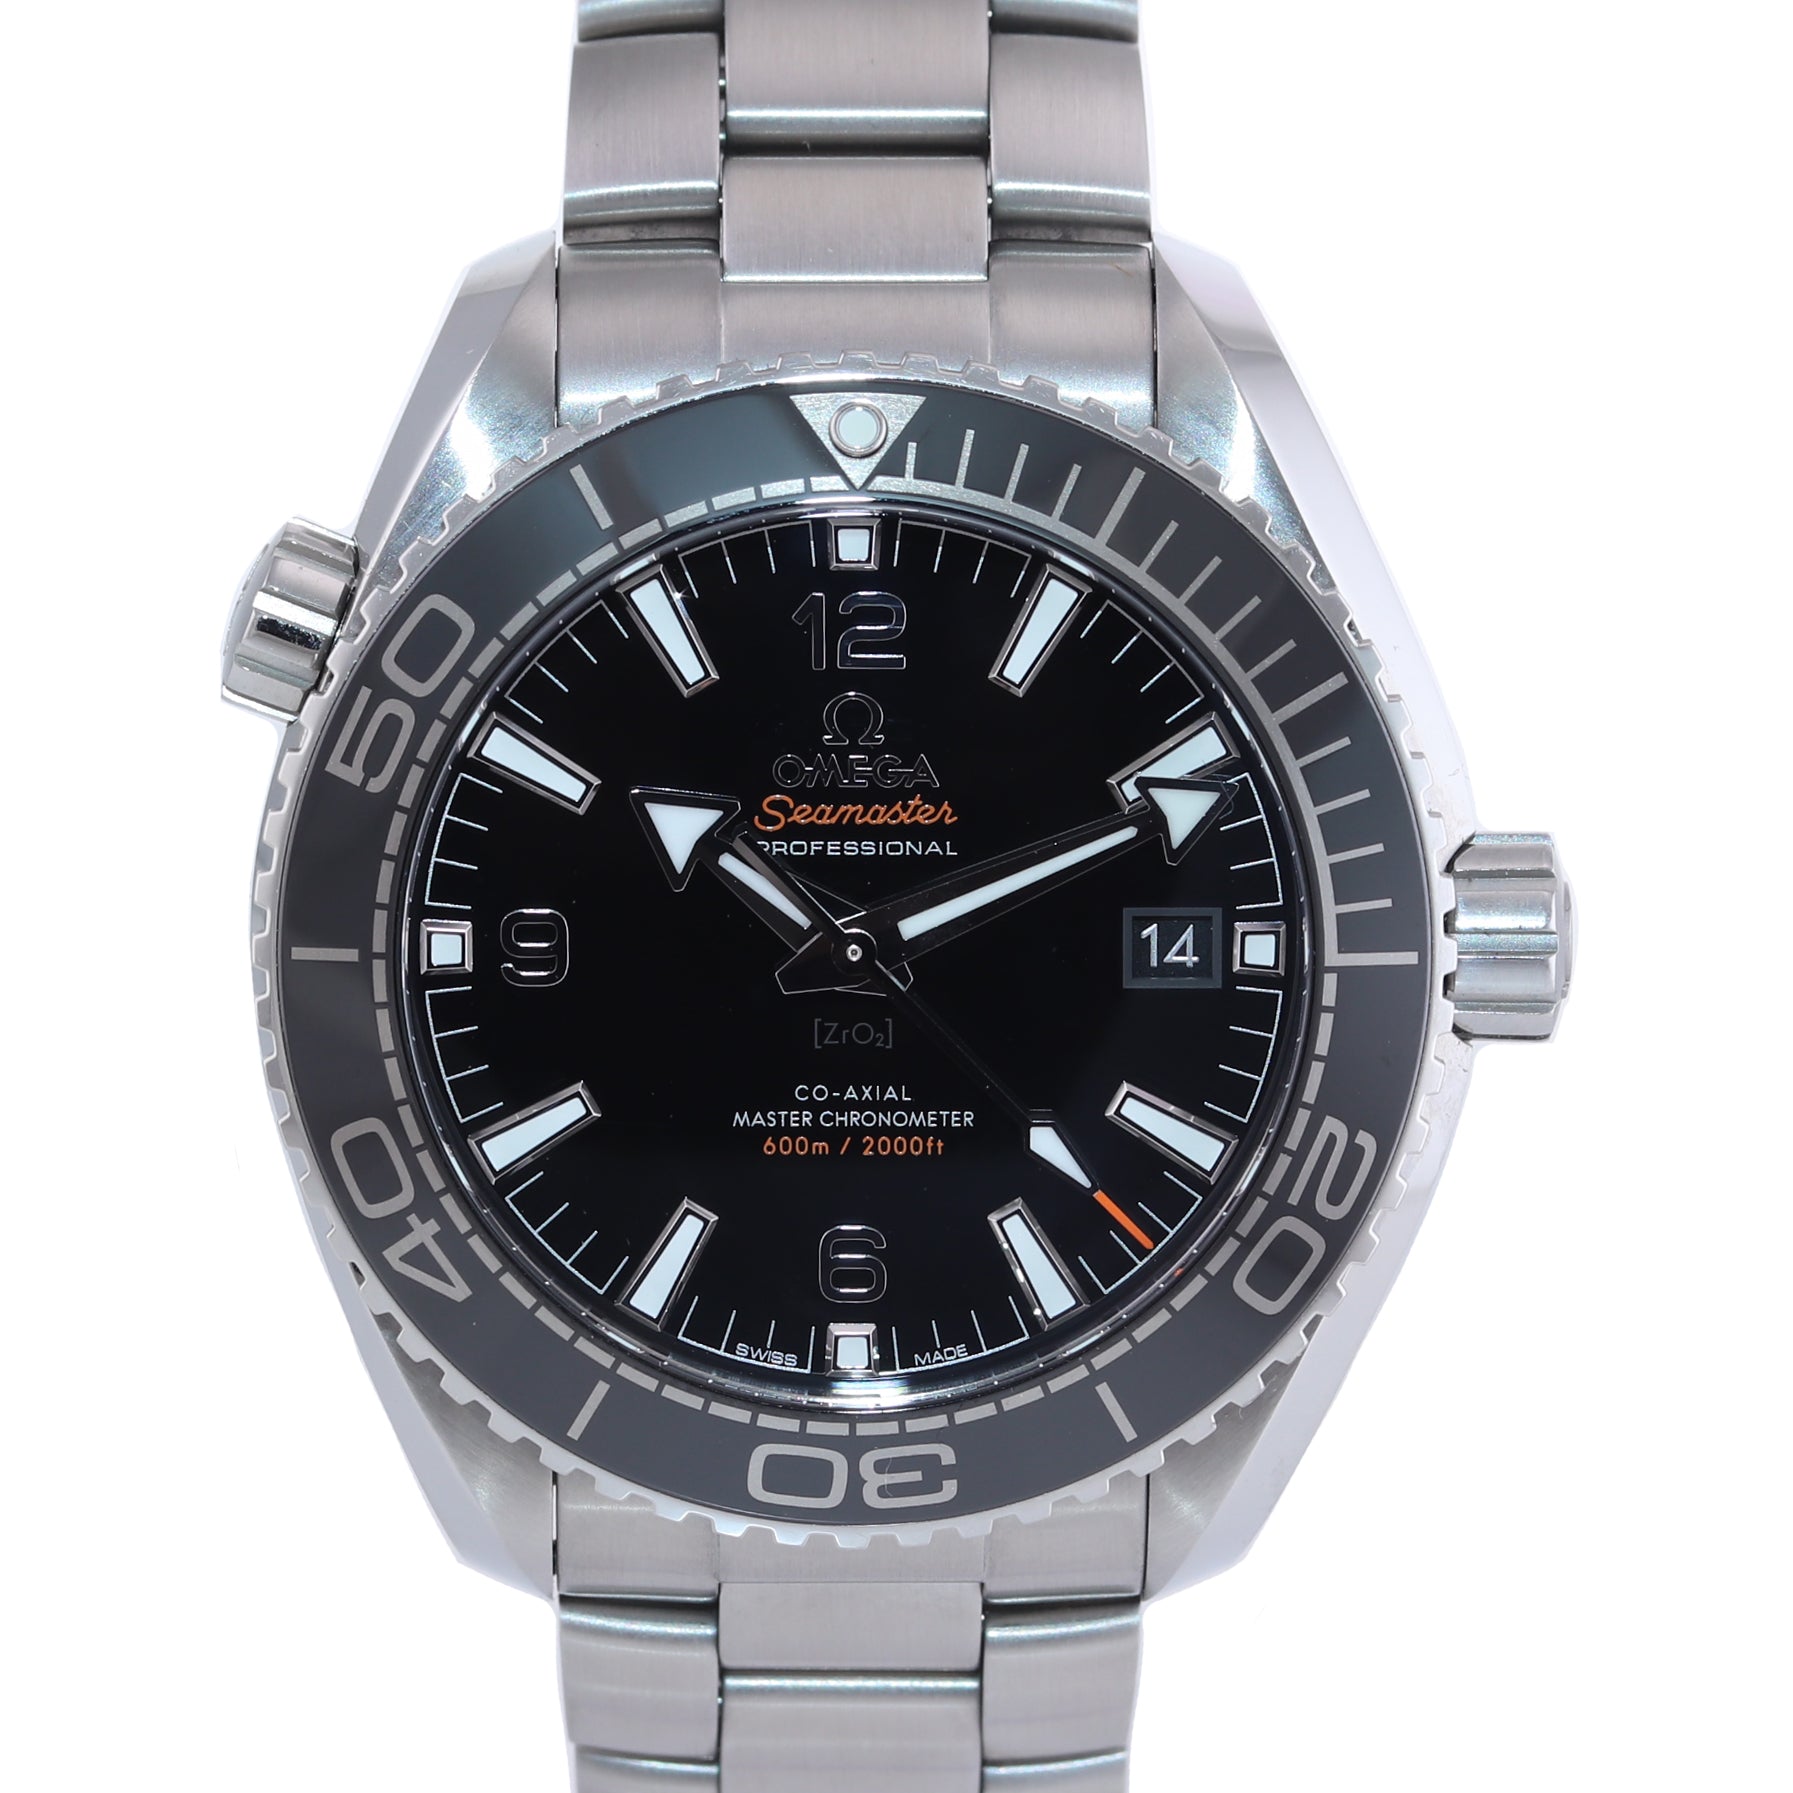 2021 PAPERS Omega Seamaster Planet Ocean 44mm 215.30.44.21.01.001 Black Watch